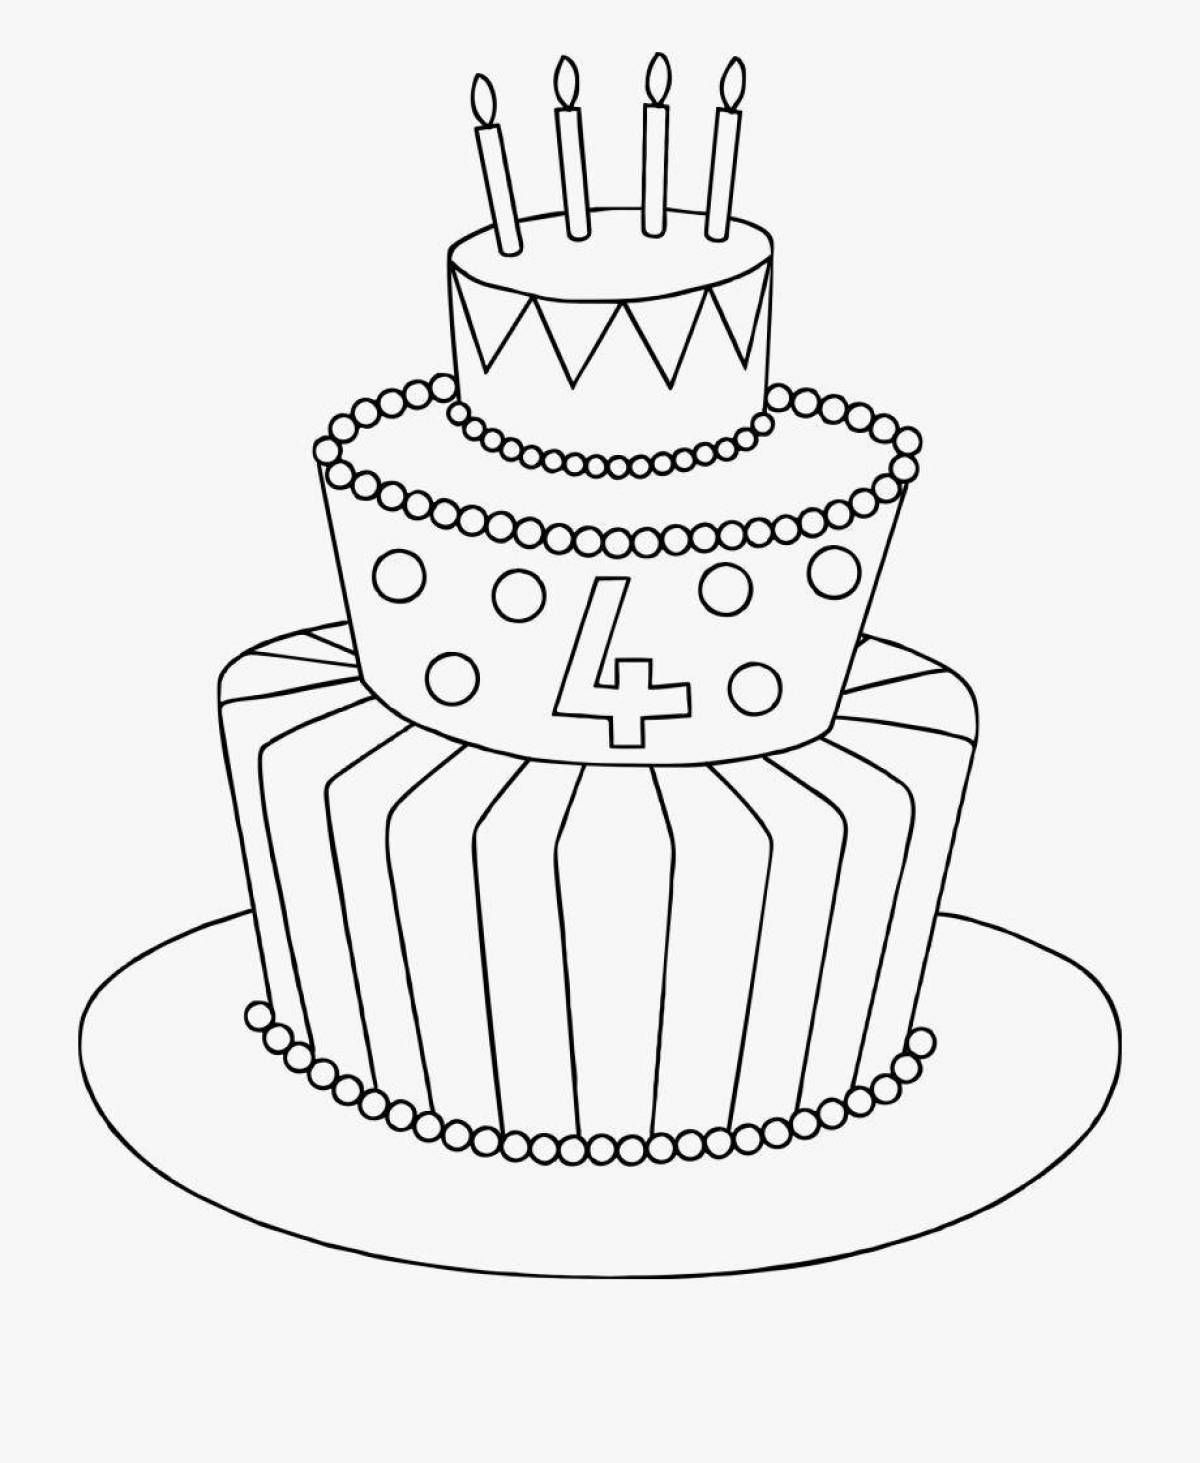 Exciting beautiful cake coloring page